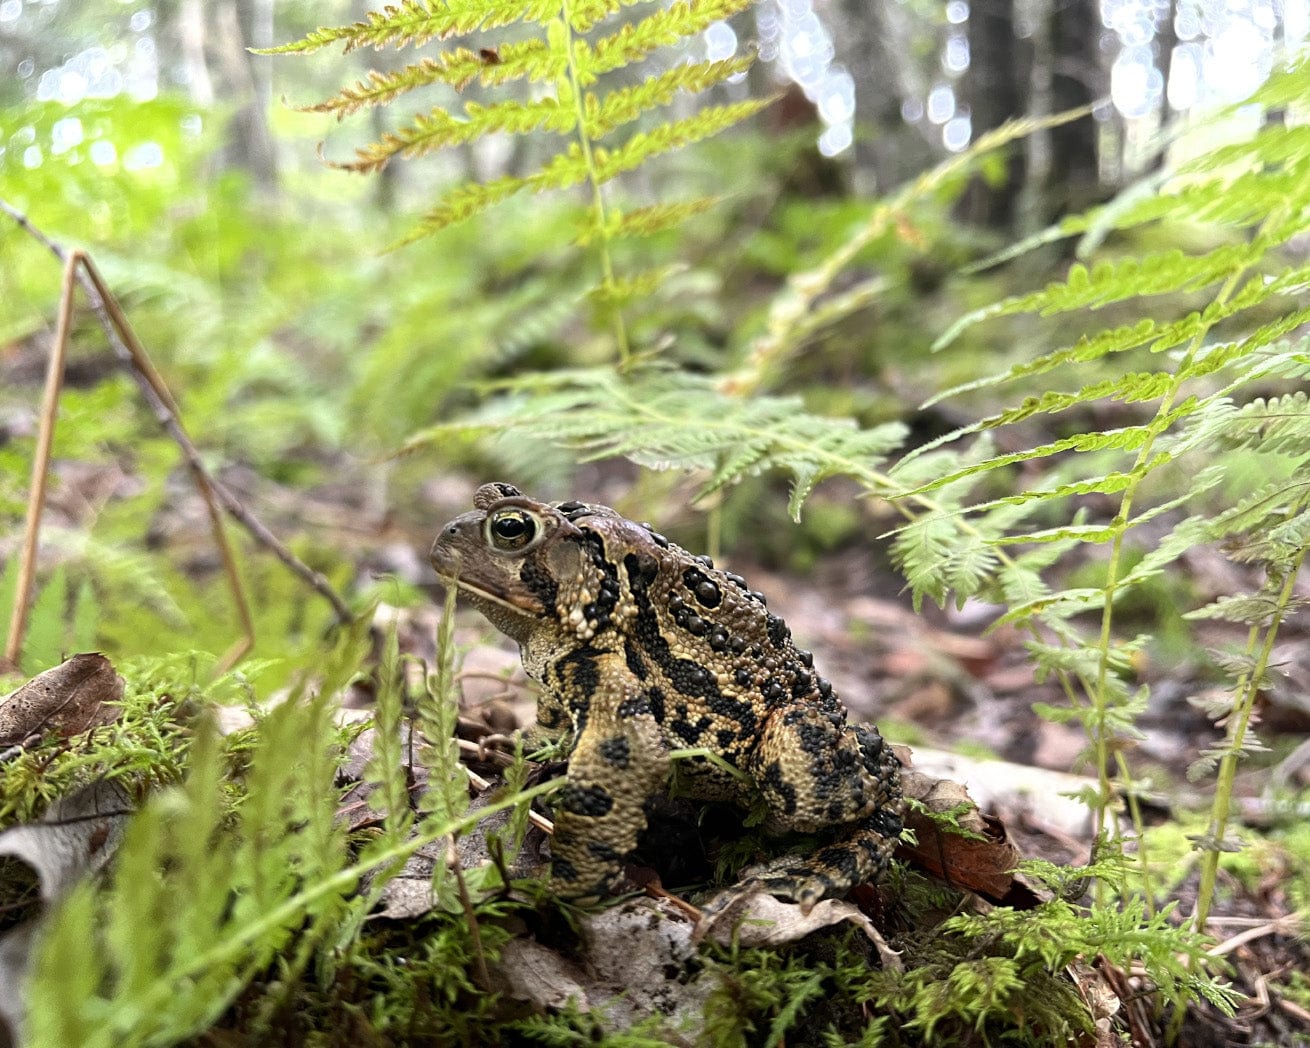 Frog in the forests of Nova Scotia